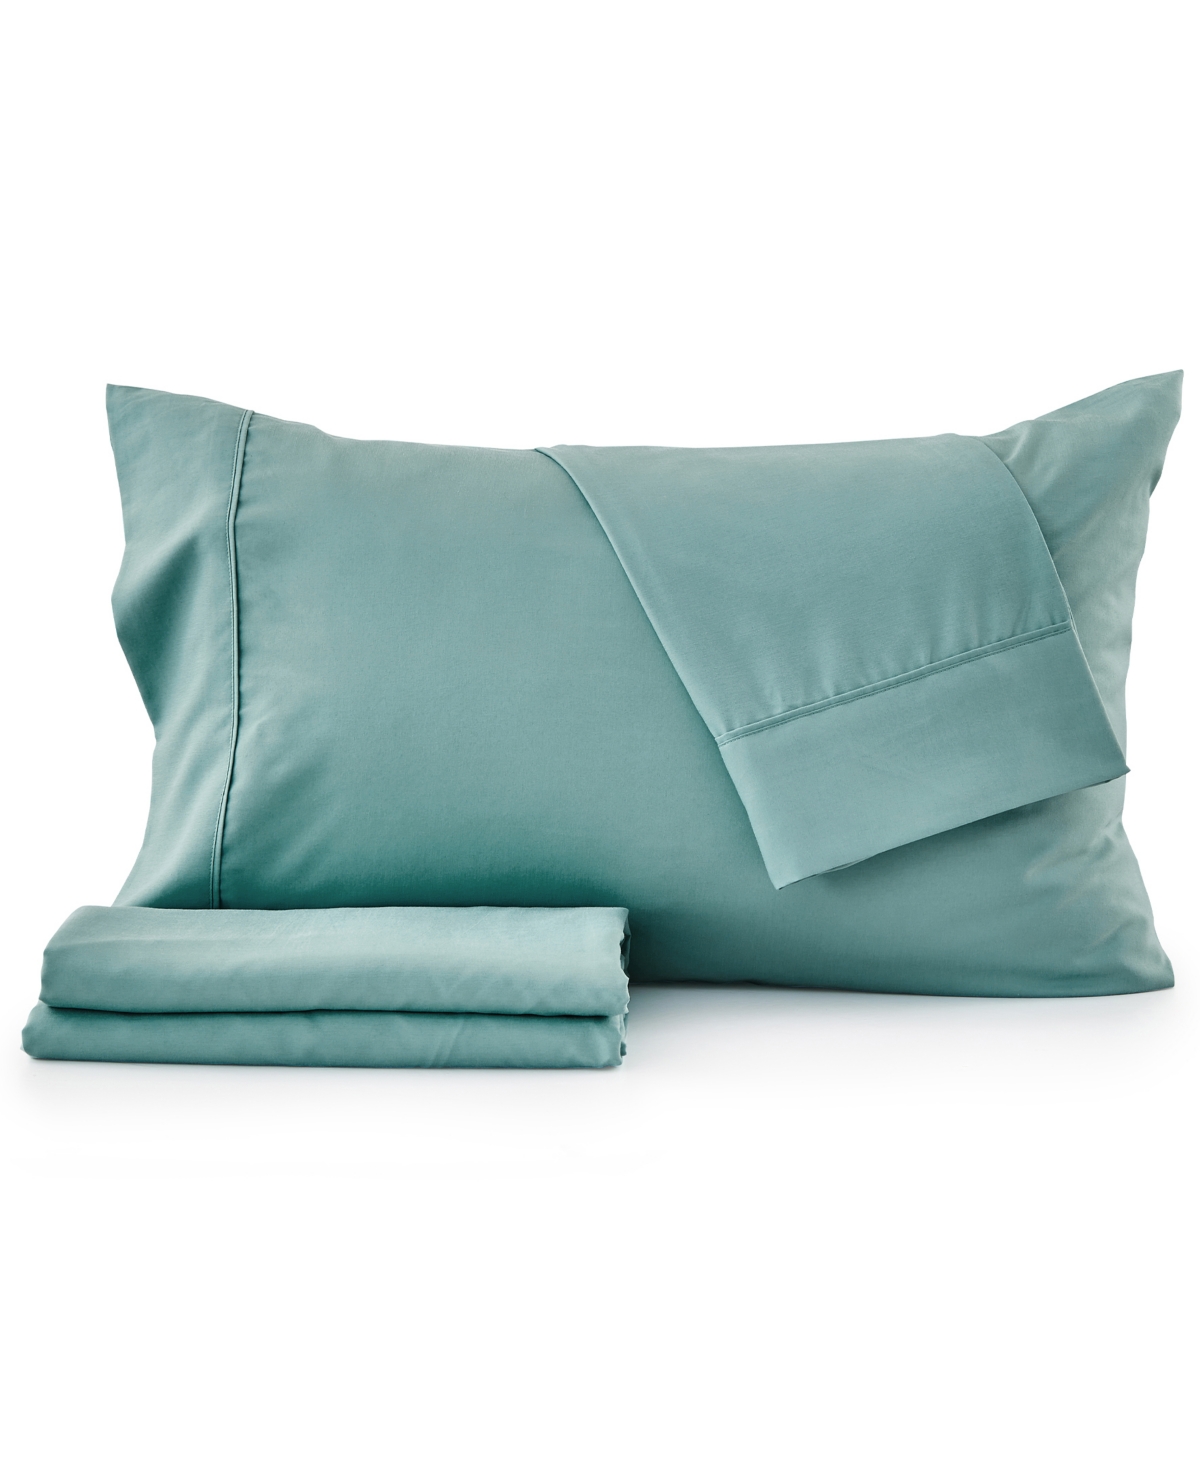 Premium Comforts Rayon From Bamboo Blend Crease-resistant 3 Piece Sheet Set, Twin In Sea